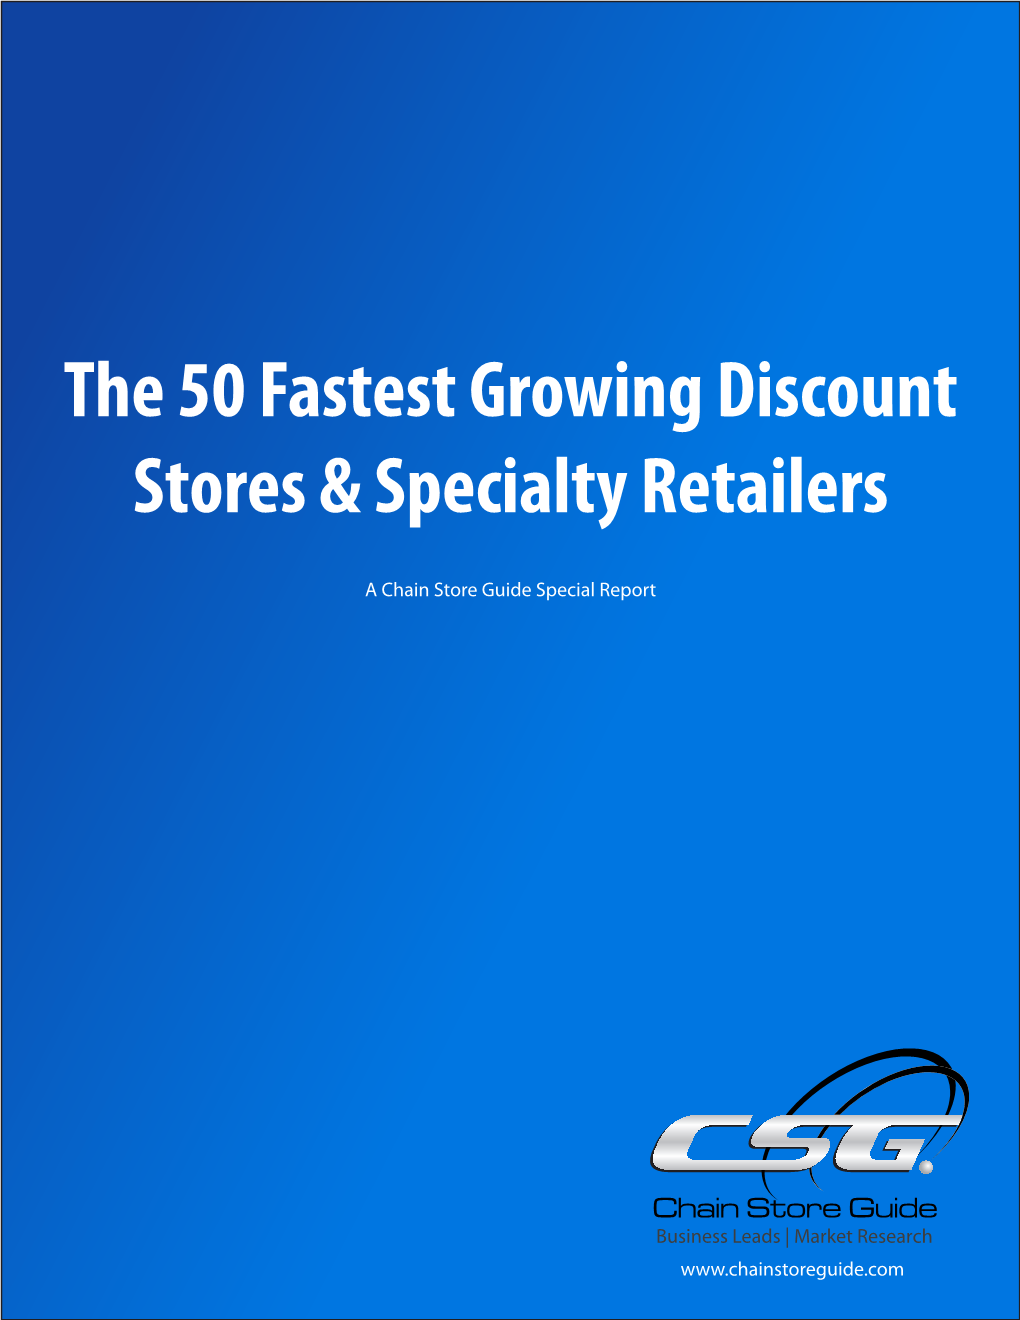 The 50 Fastest Growing Discount Stores & Specialty Retailers